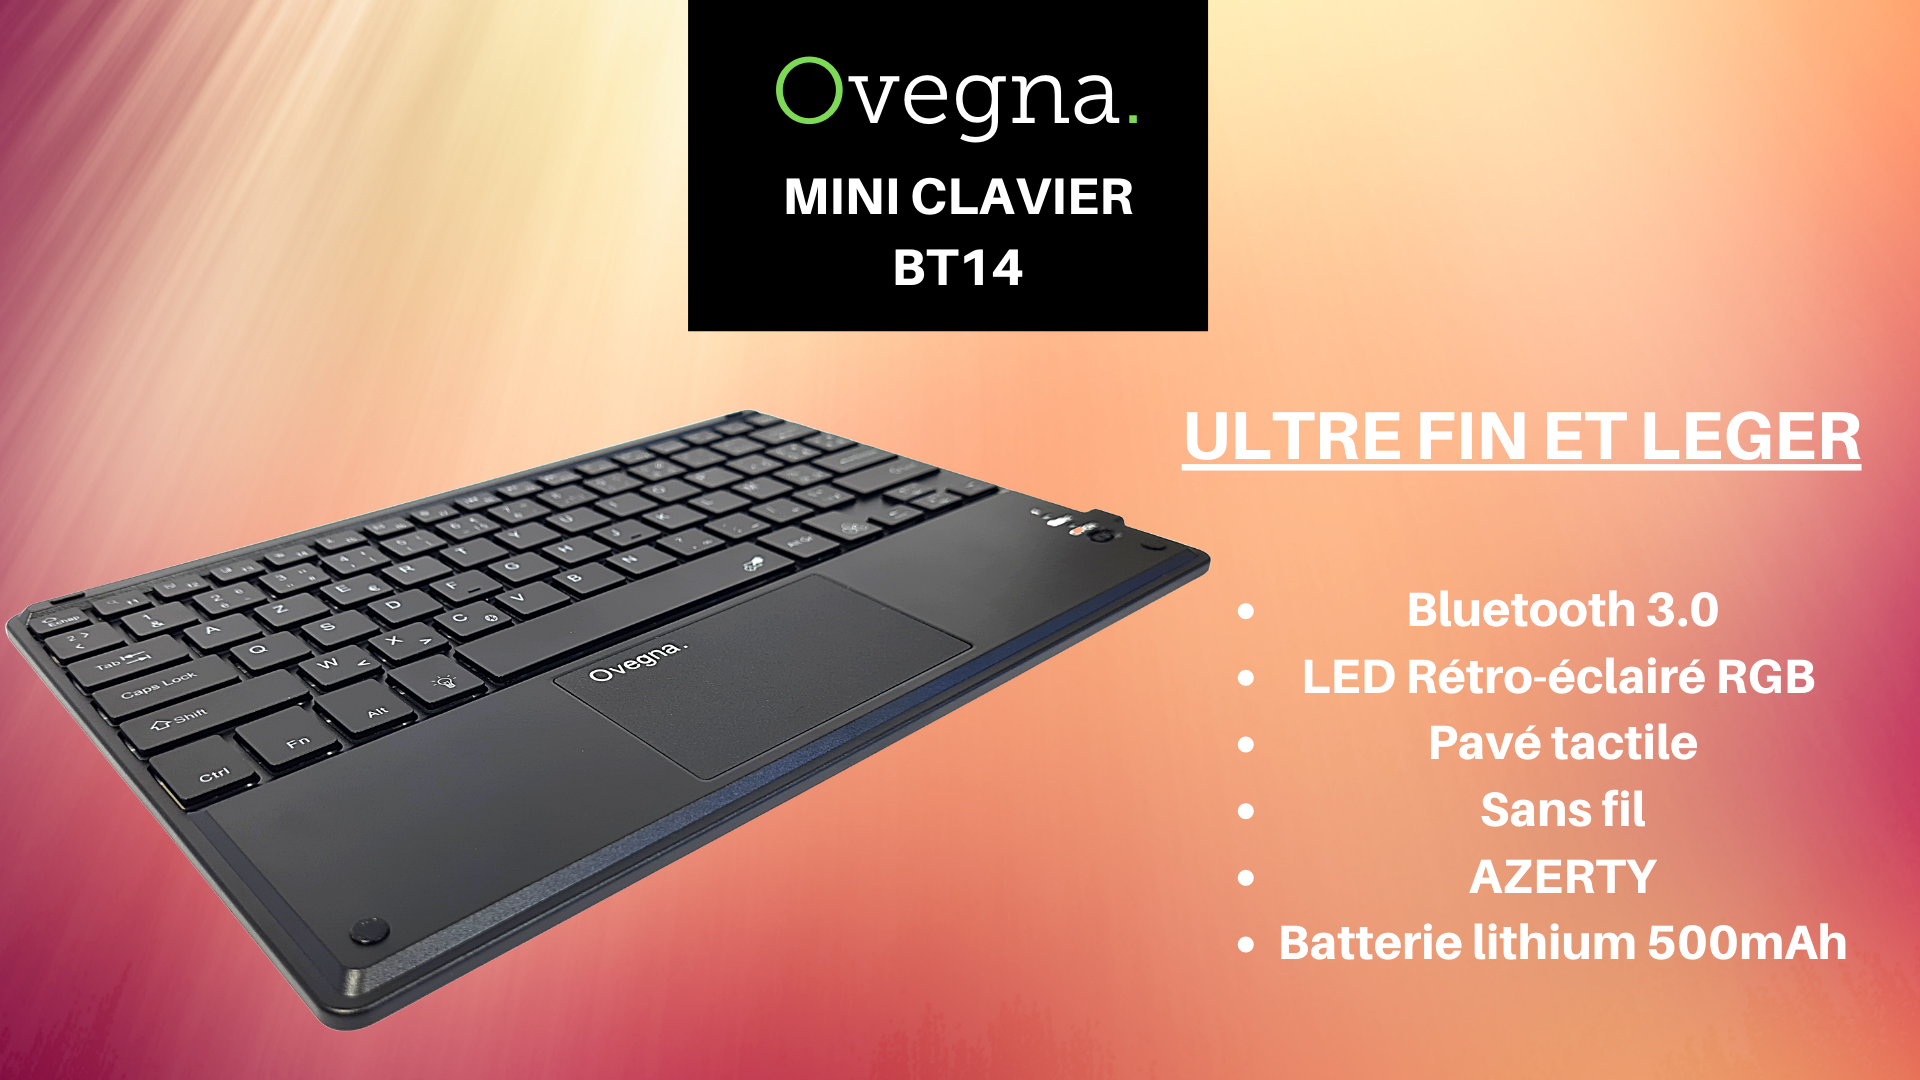 ovegna-bt14-ultra-fine-bluetooth-3-0-azerty-keyboard-led-backlit-7-colours-touchpad-lithium-battery-for-smartphones-smarttvs-and-tablets-in-android-windows-and-ios--53